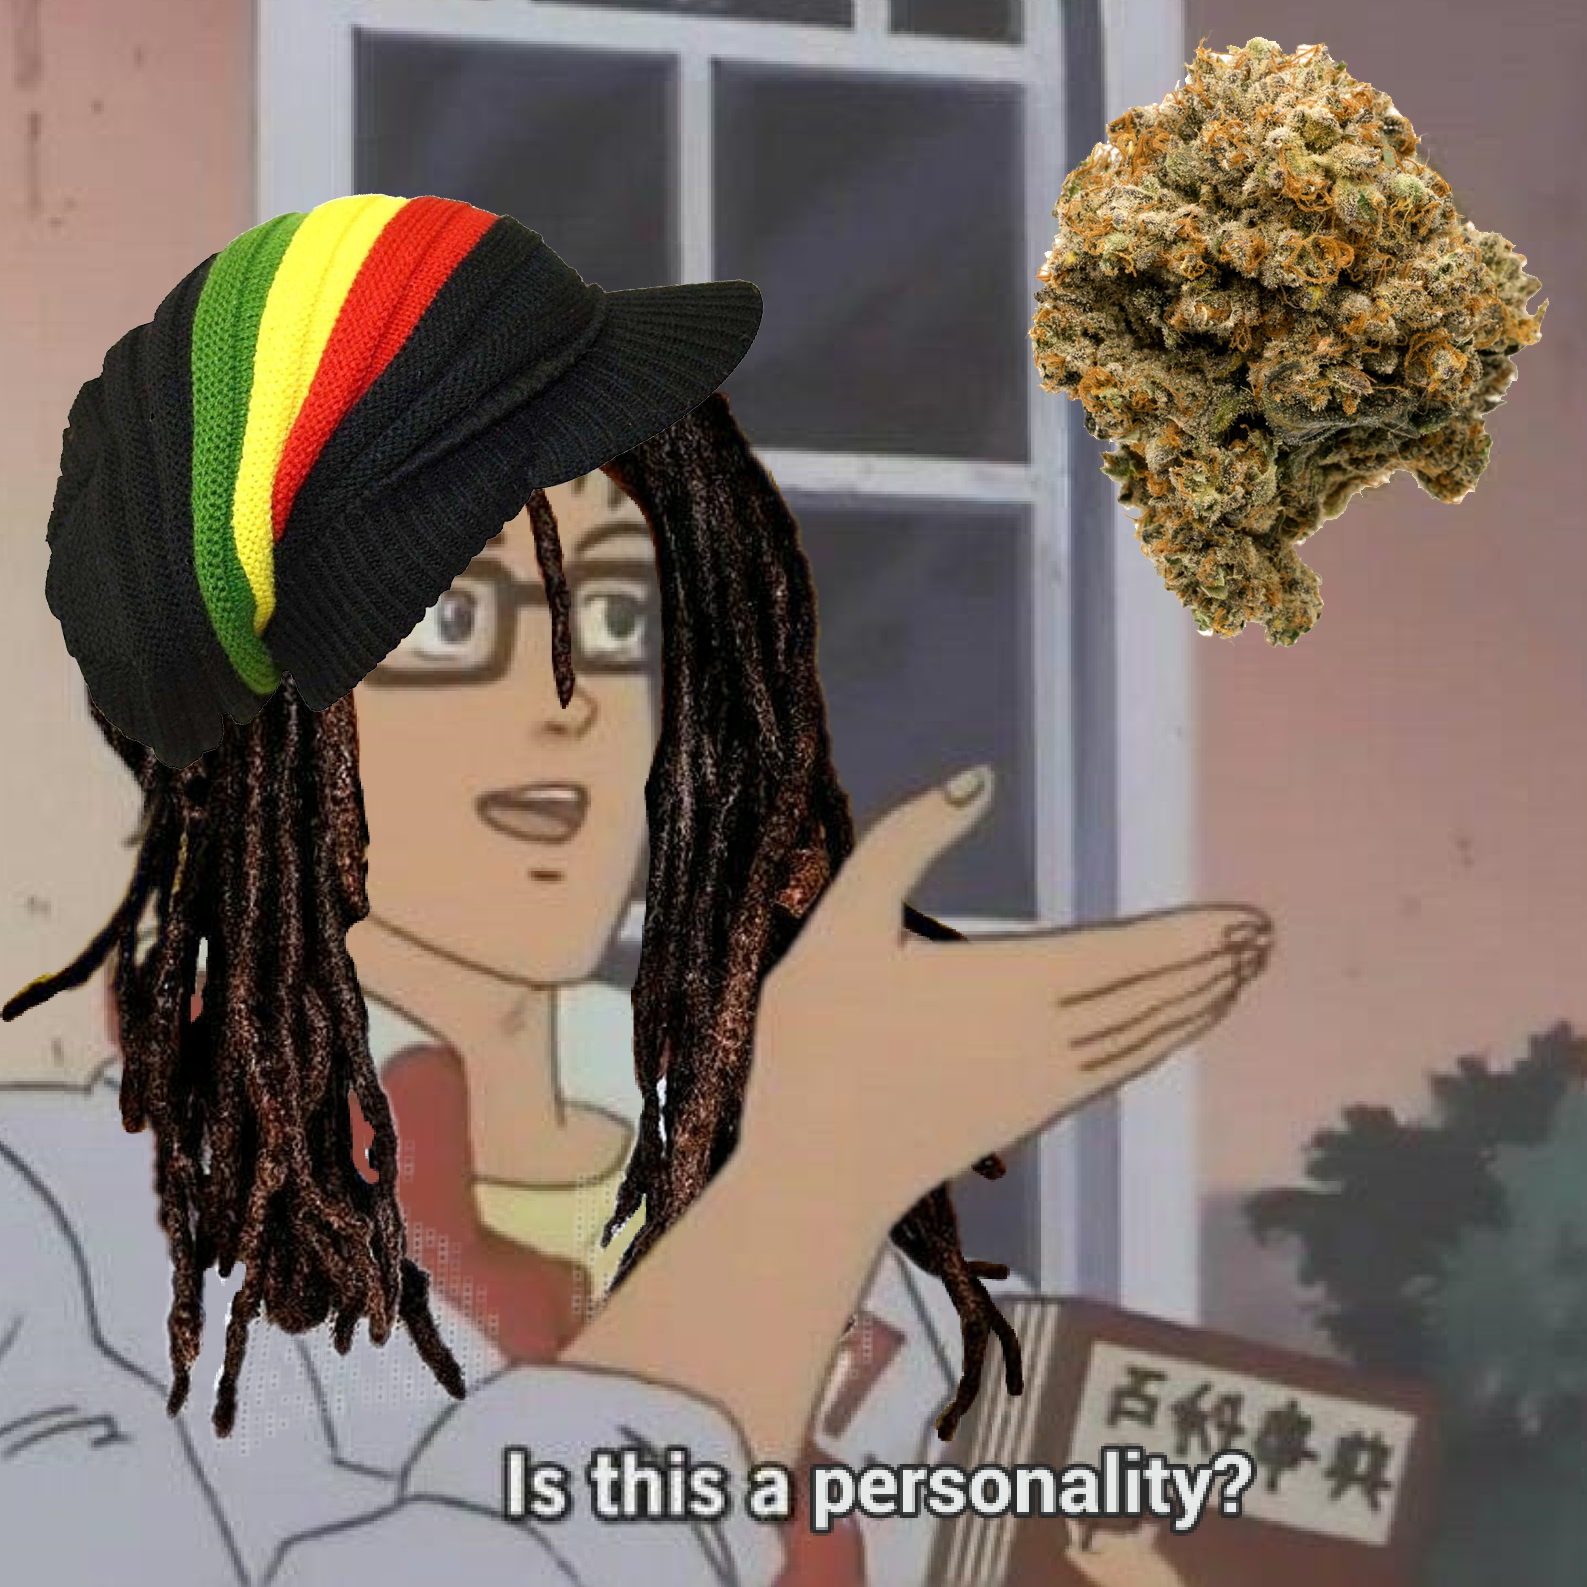 weed meme- pigeon fortnite meme - 60 Is this a personality?